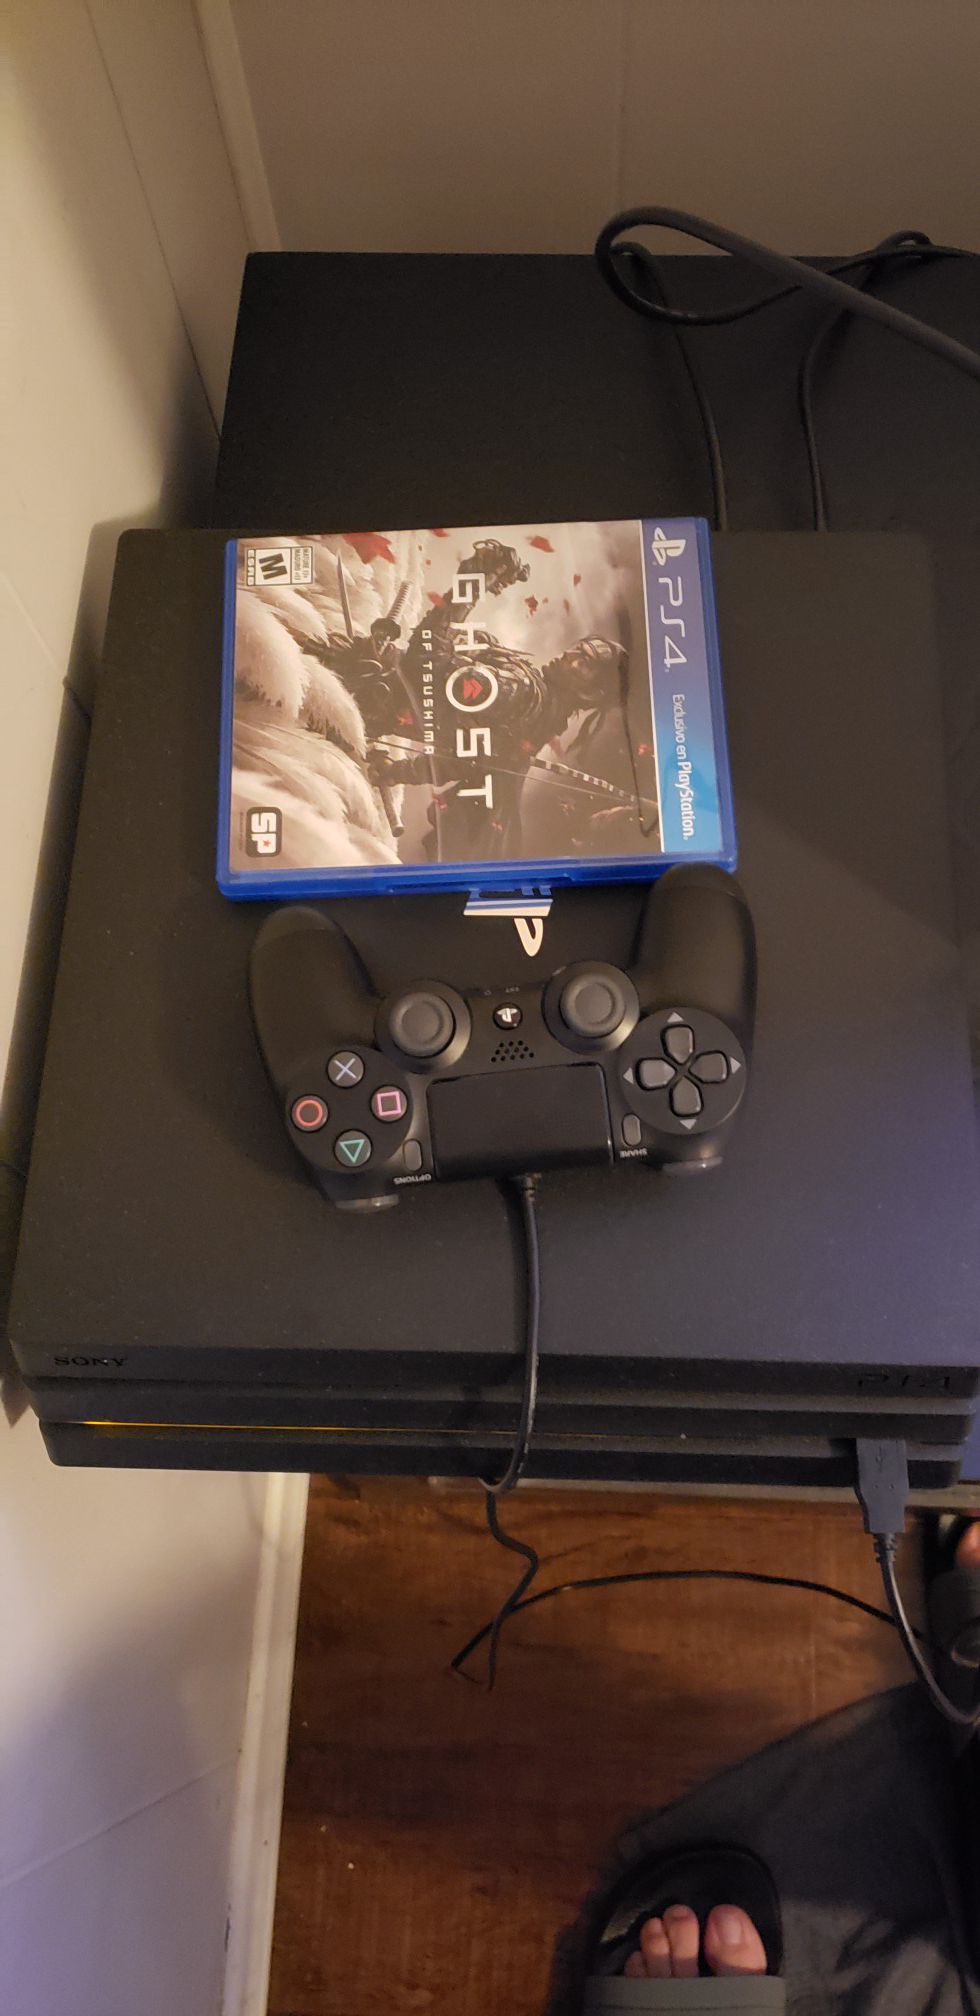 Ps4 pro with 2 tb internal hard drive and ghost of tsushima